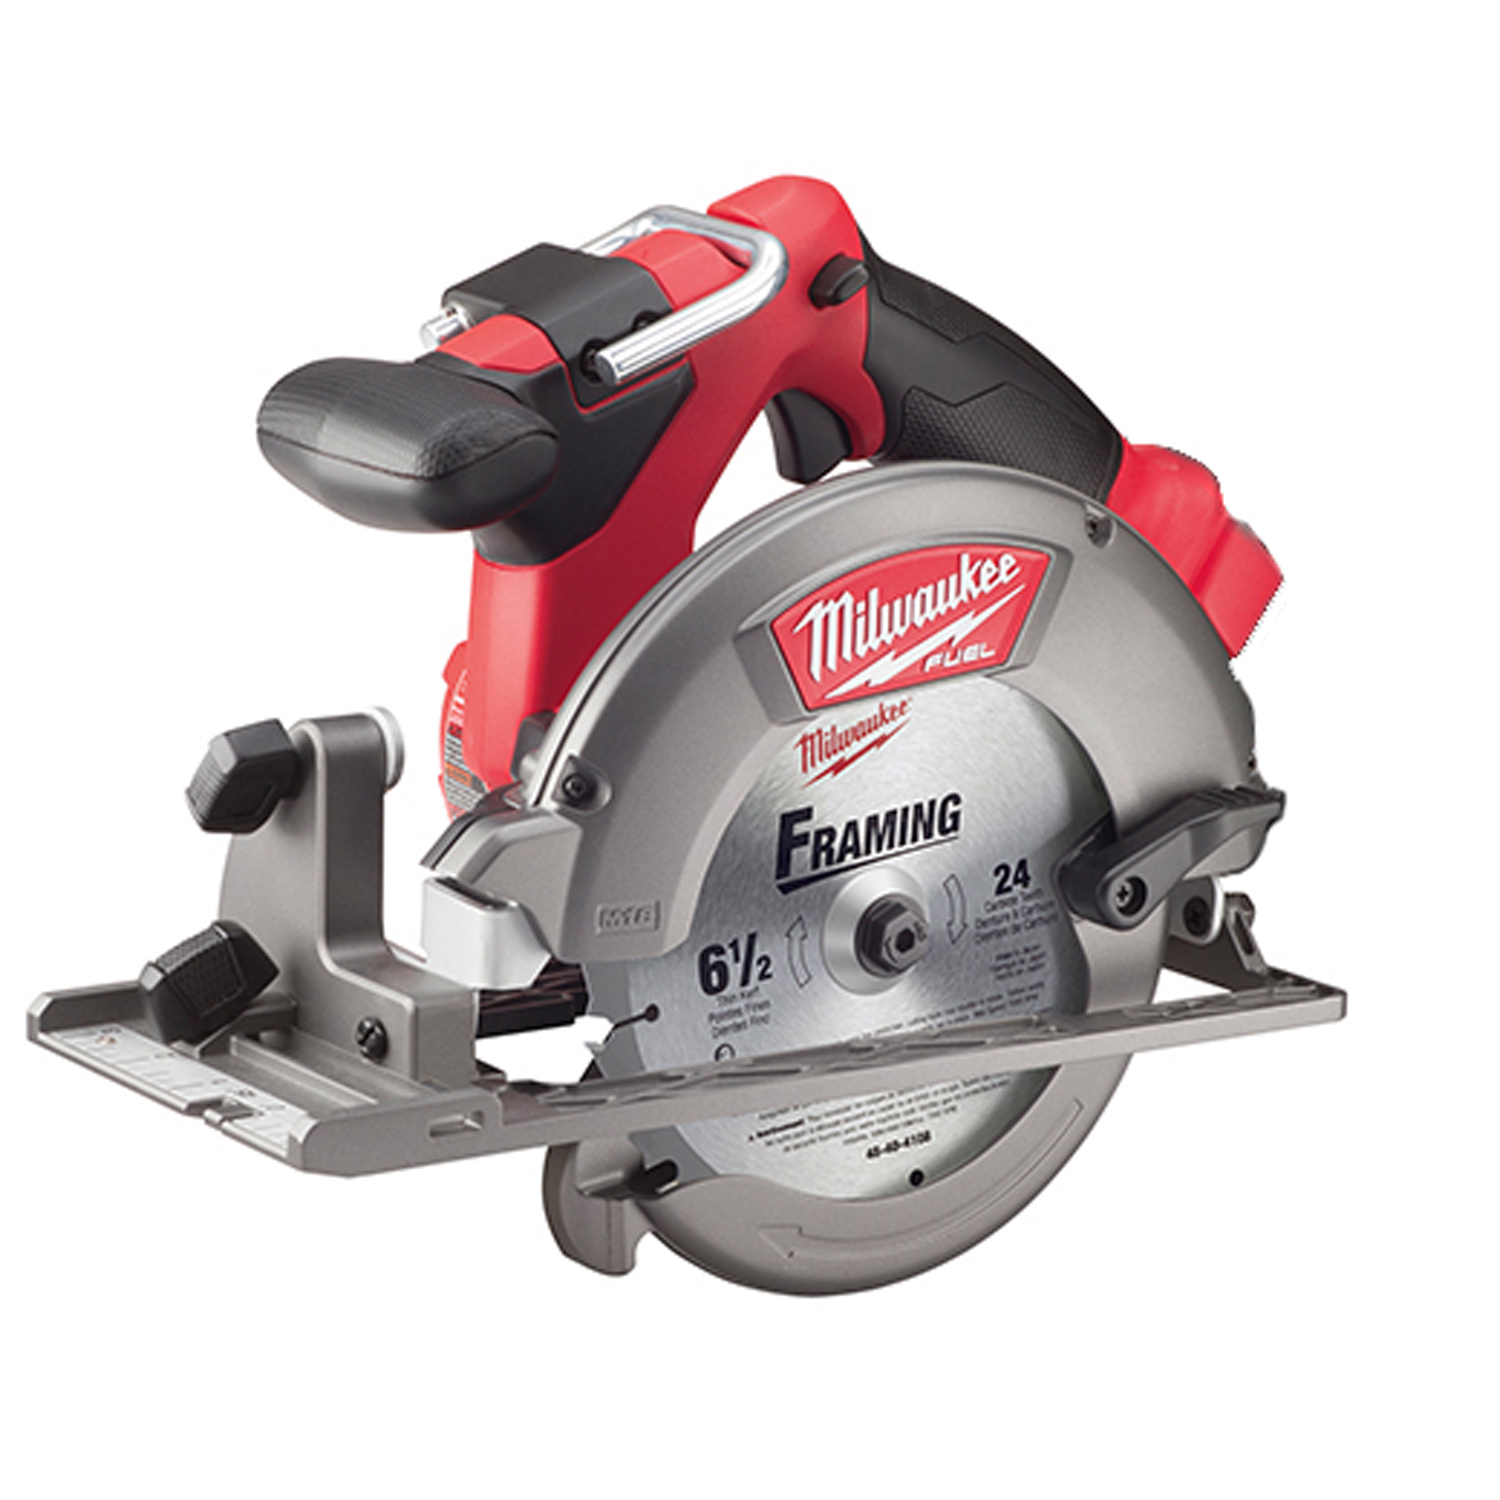 M18 FUEL™ 6-1/2 in. Circular Saw-Reconditioned Image